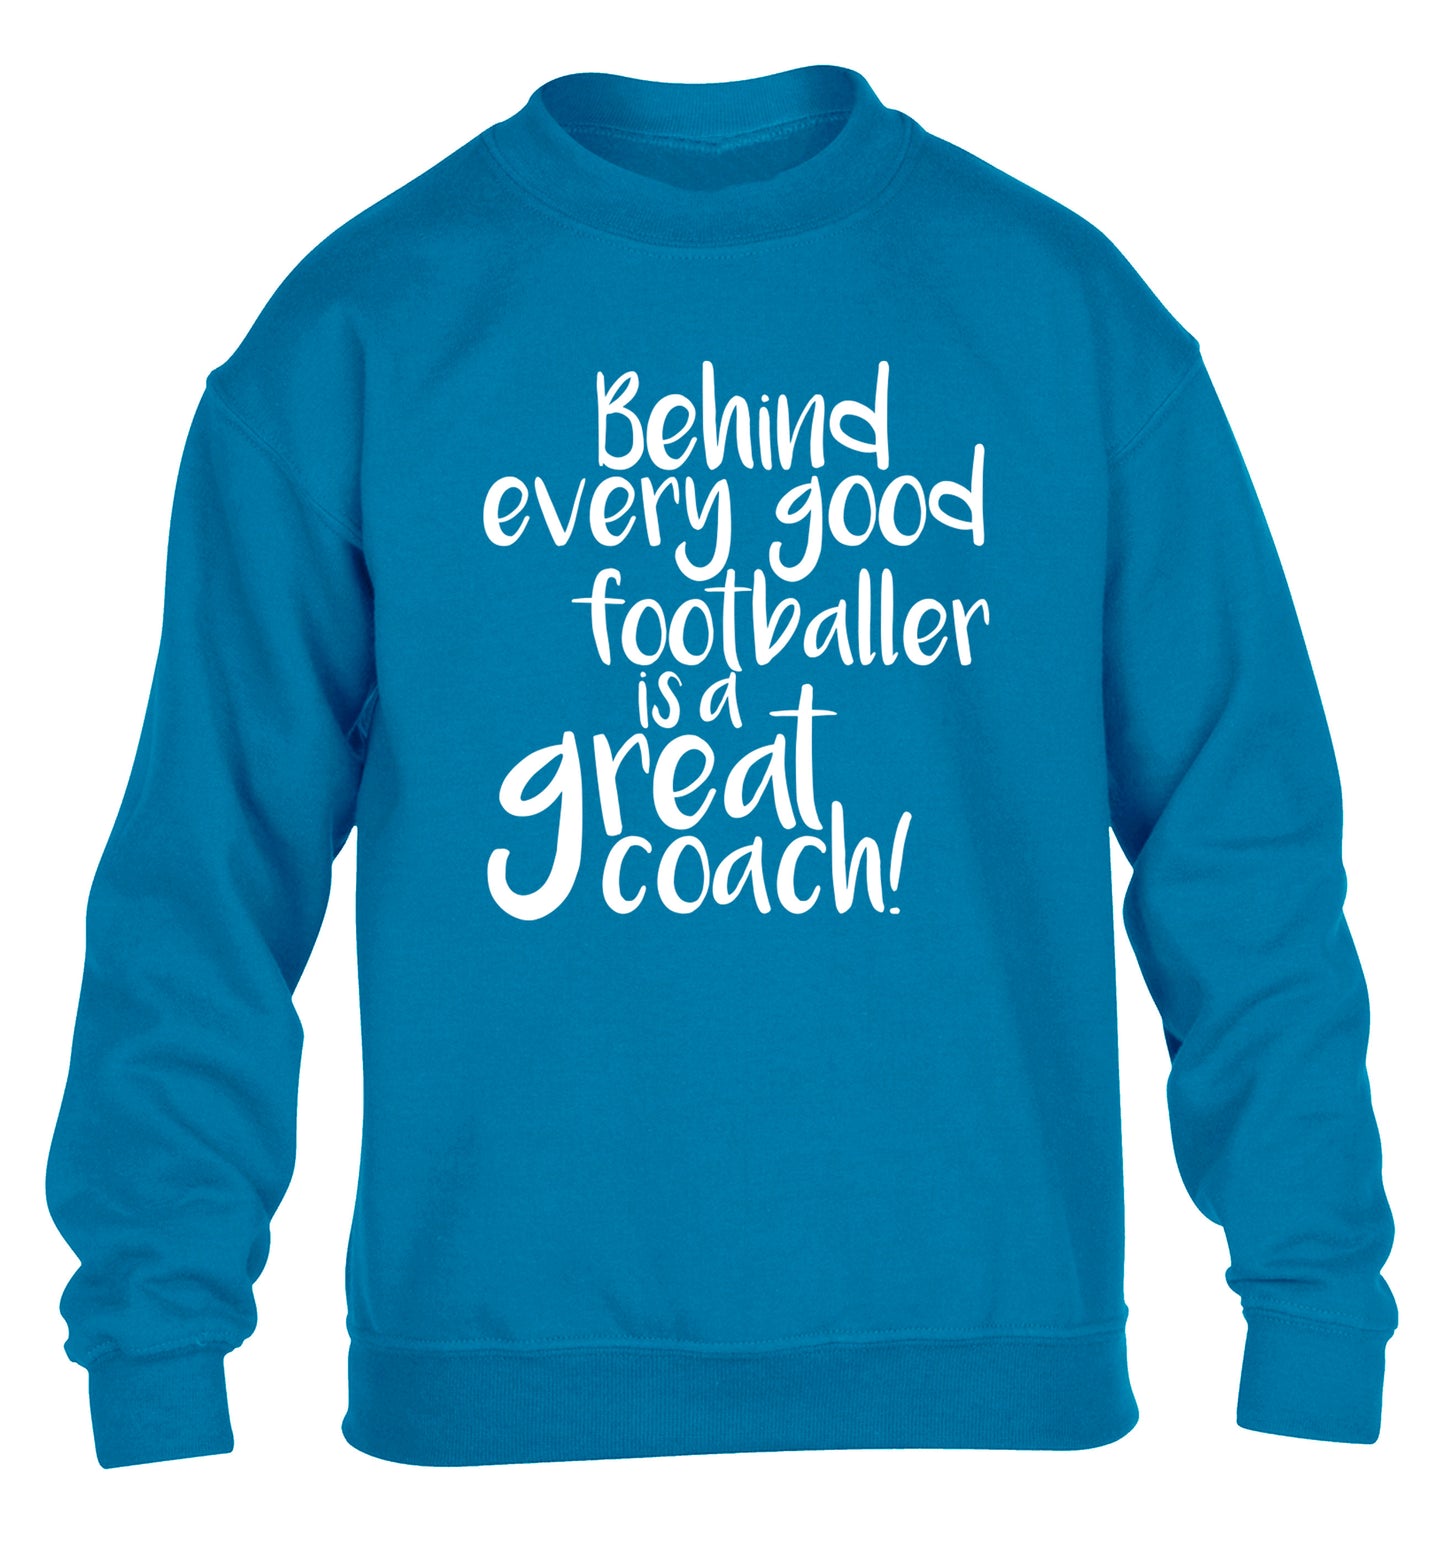 Behind every good footballer is a great coach! children's blue sweater 12-14 Years